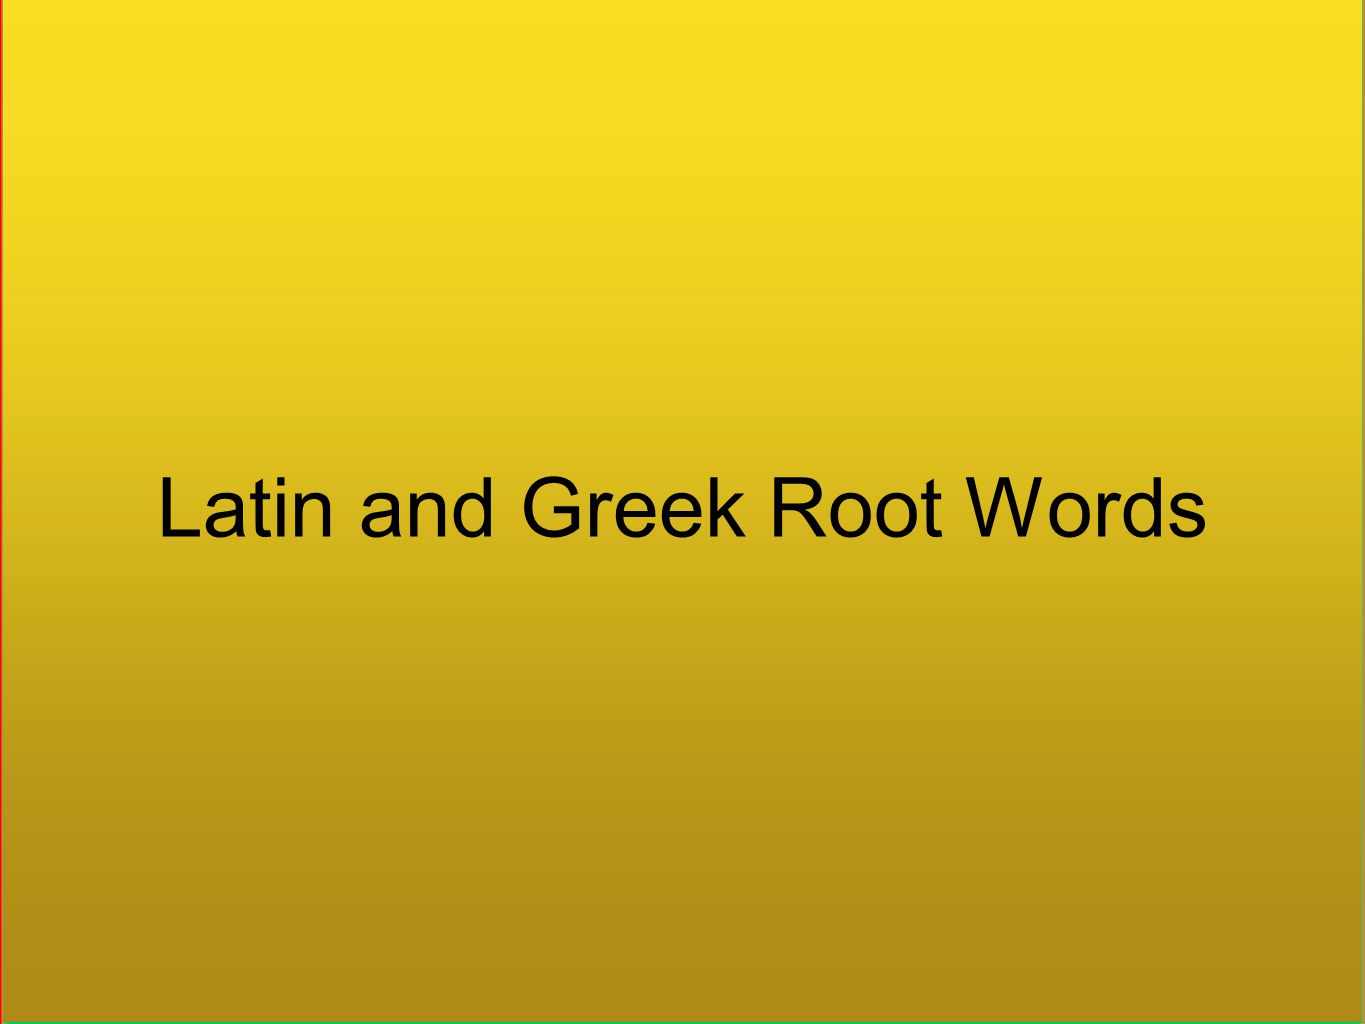 Latin and Greek Root Words - ppt video online download